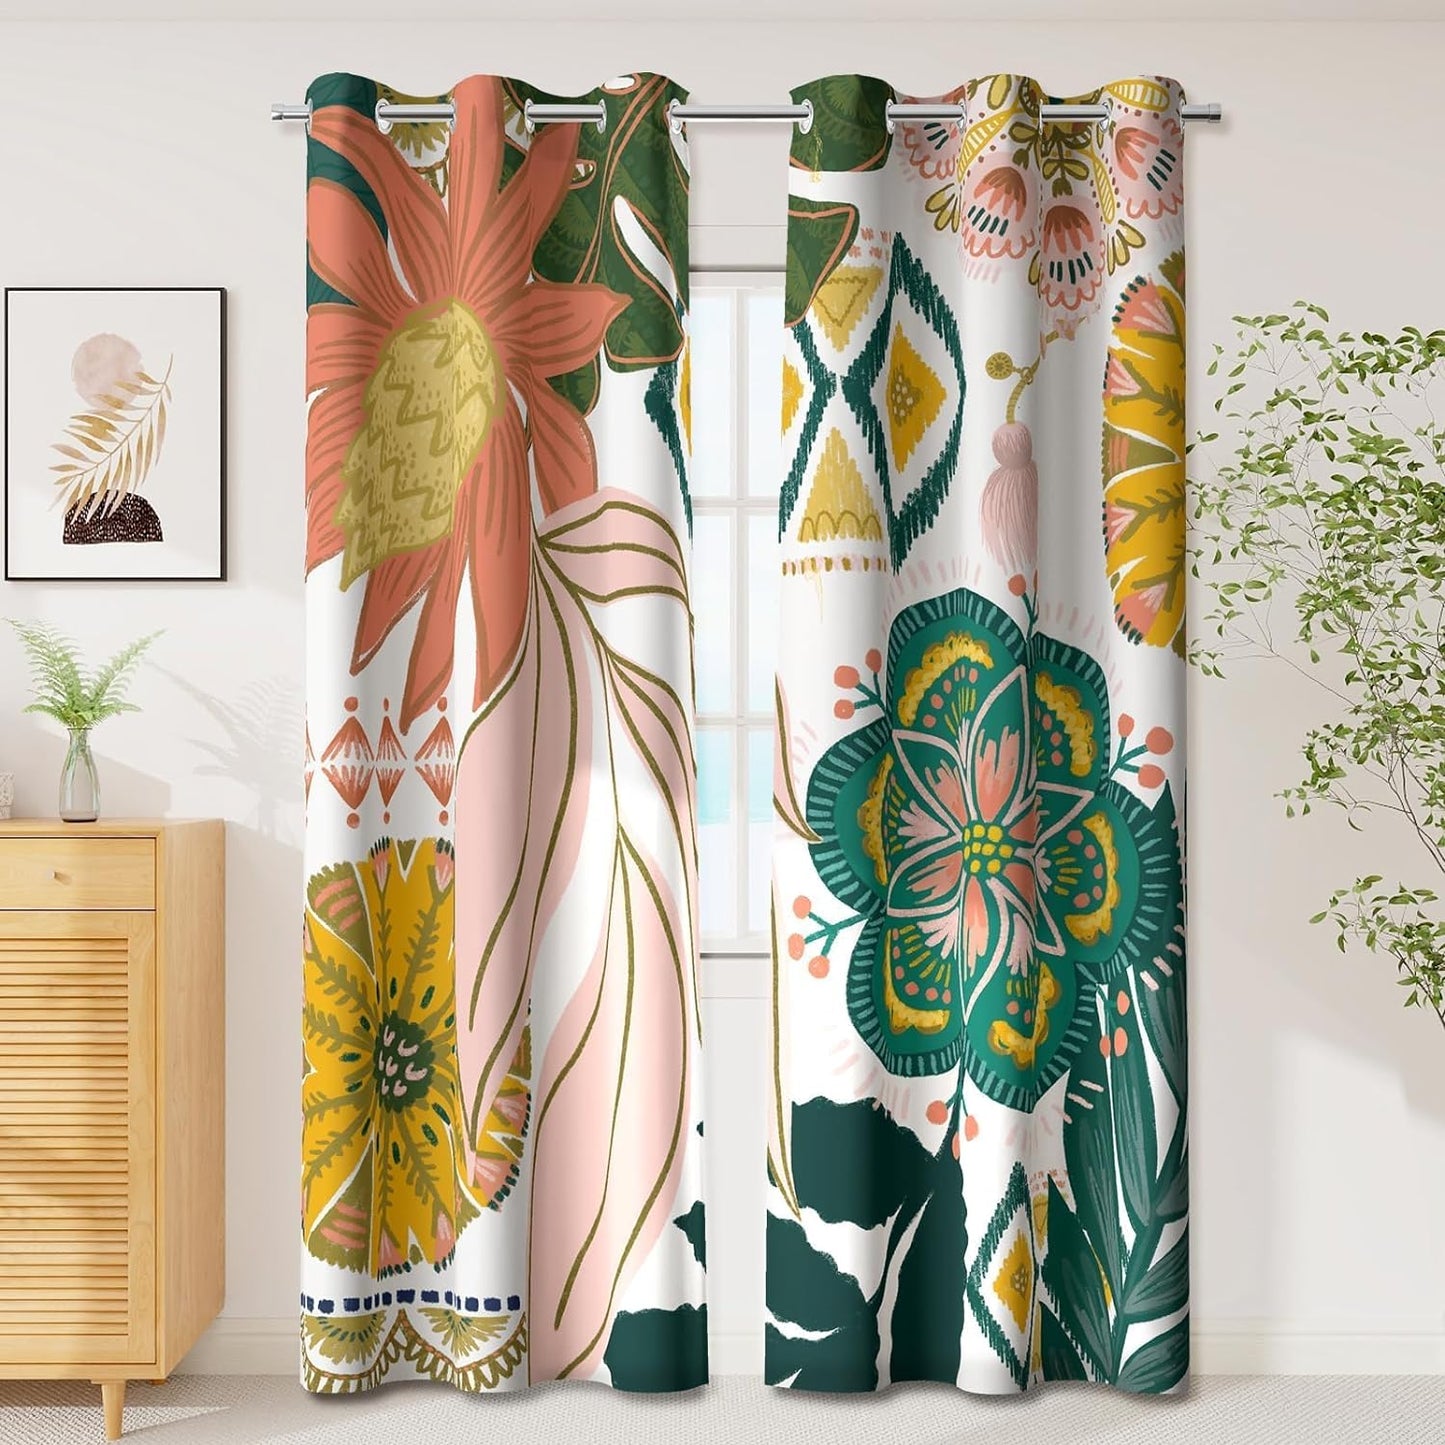 Boho Floral 100% Blackout Curtains for Living Room 96 Inch Long 2 Panels Mid Century Botanical Black Out Curtains for Bedroom Grommet Thermal Insulated Room Darkening Window Drapes,52Wx96L  Tyrot Boho Floral Print 42W X 63L Inch X 2 Panels 